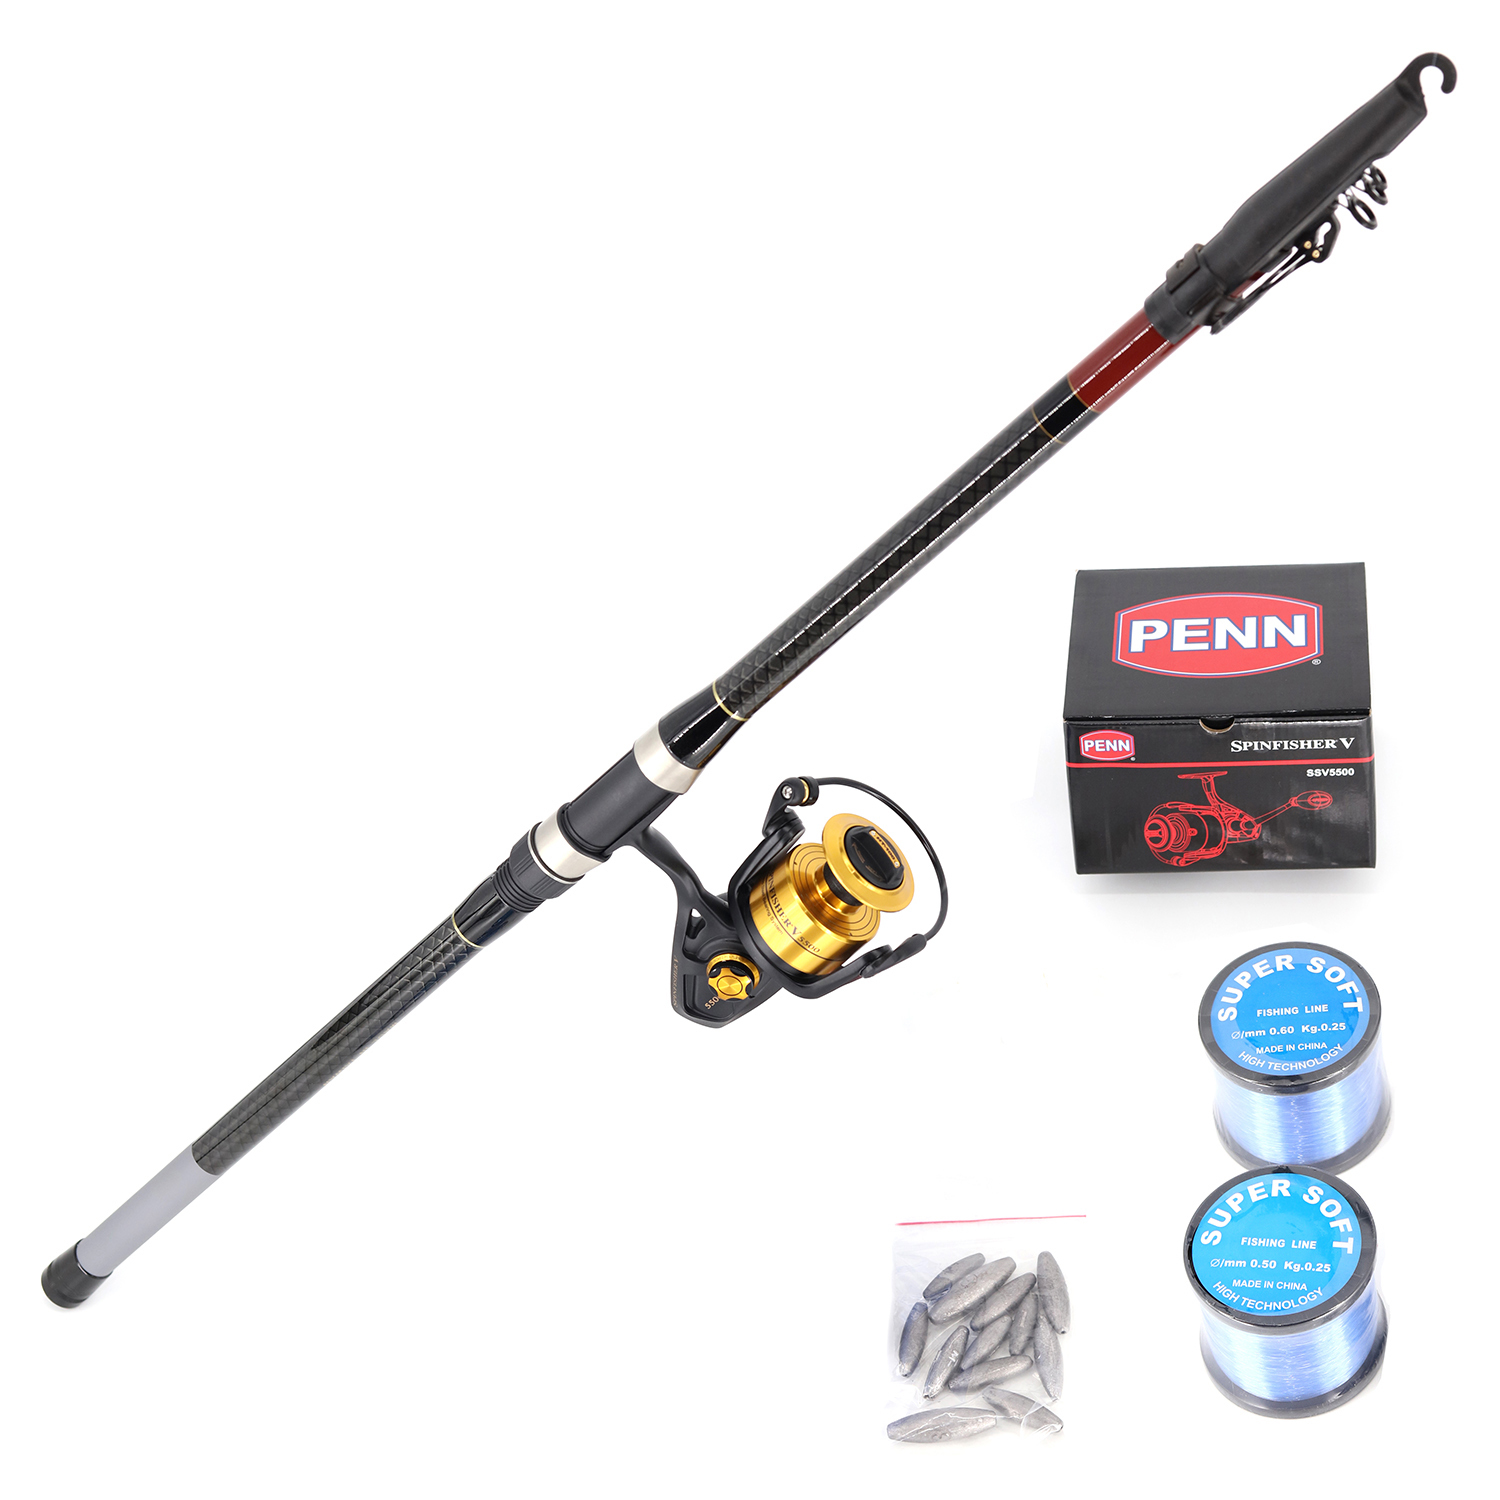 Shore Fishing (Pilot 3.6m and Penn V5500 including Nylon line with rigs and sinkers) Combo